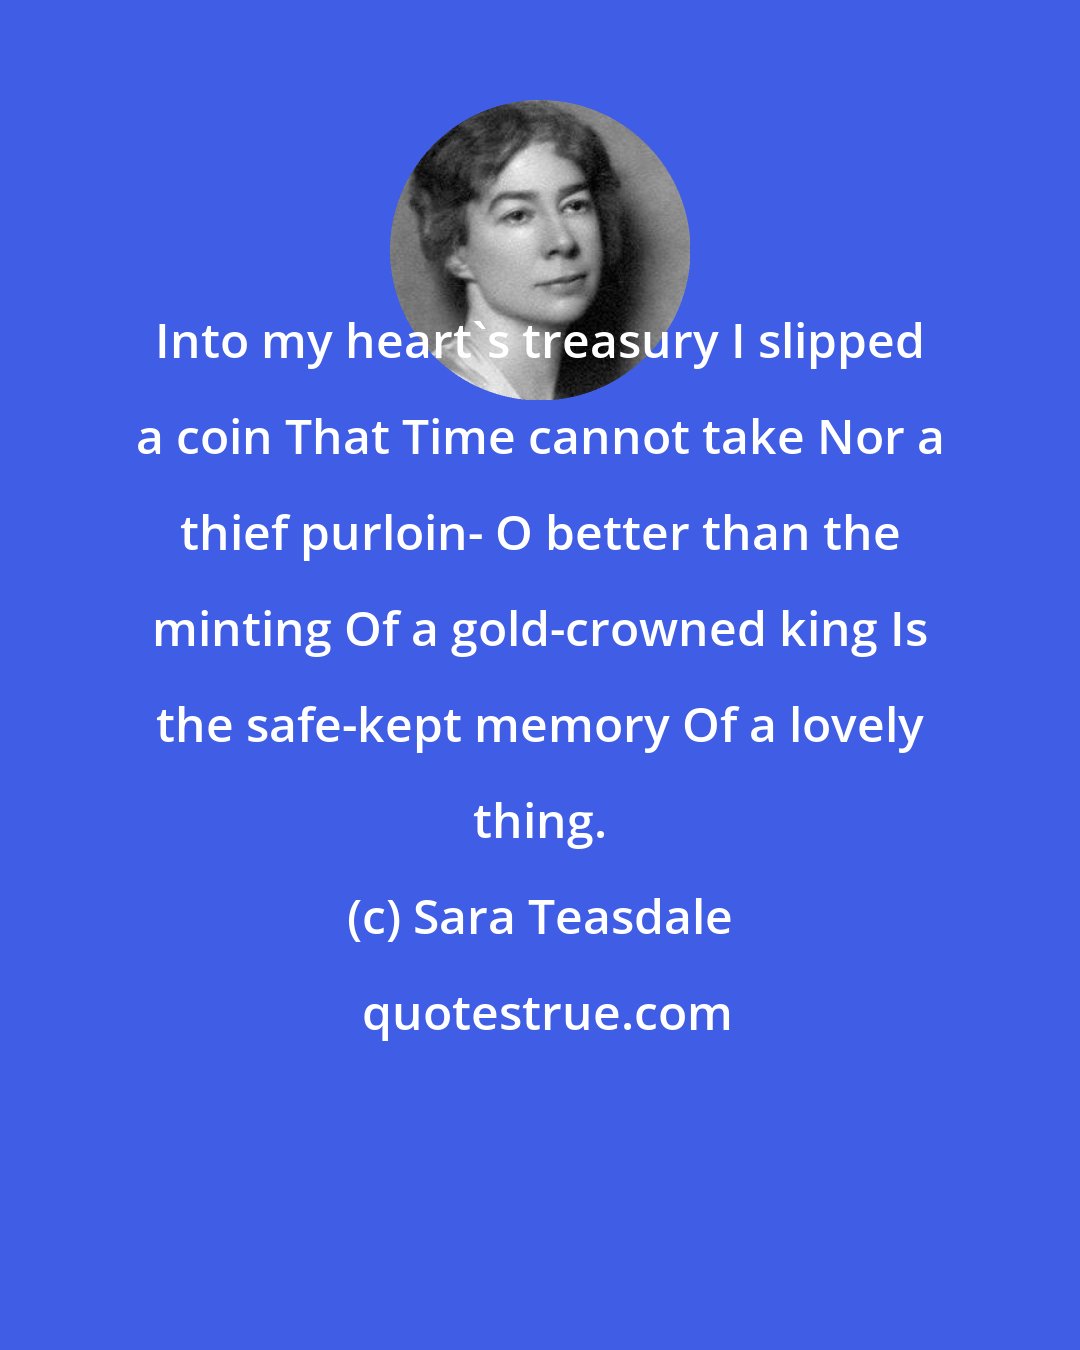 Sara Teasdale: Into my heart's treasury I slipped a coin That Time cannot take Nor a thief purloin- O better than the minting Of a gold-crowned king Is the safe-kept memory Of a lovely thing.